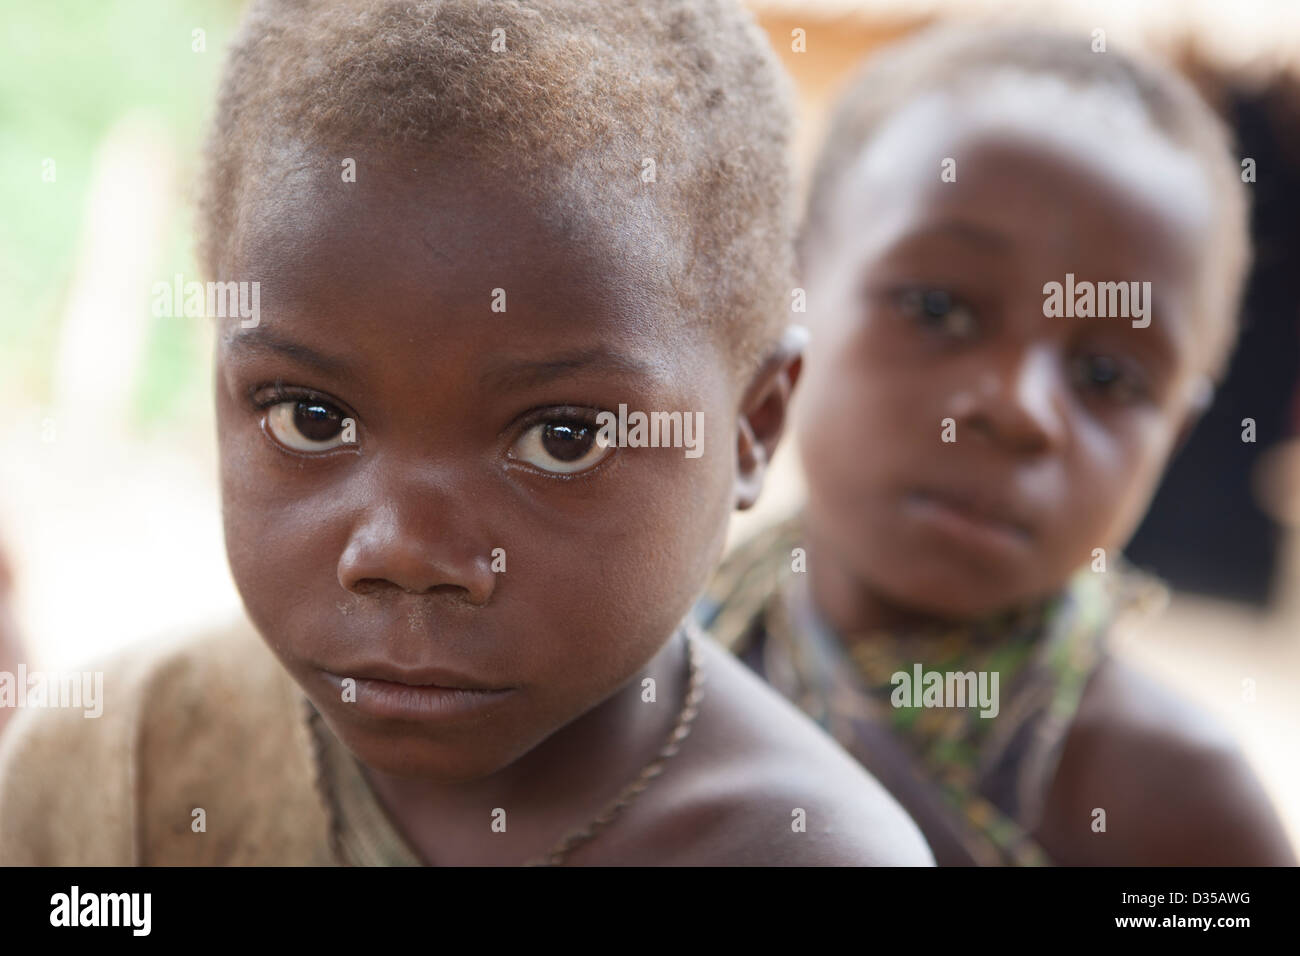 CONGO, 26th Sept 2012: Young children in a community of Bata pigmy people, Sieh village. Stock Photo